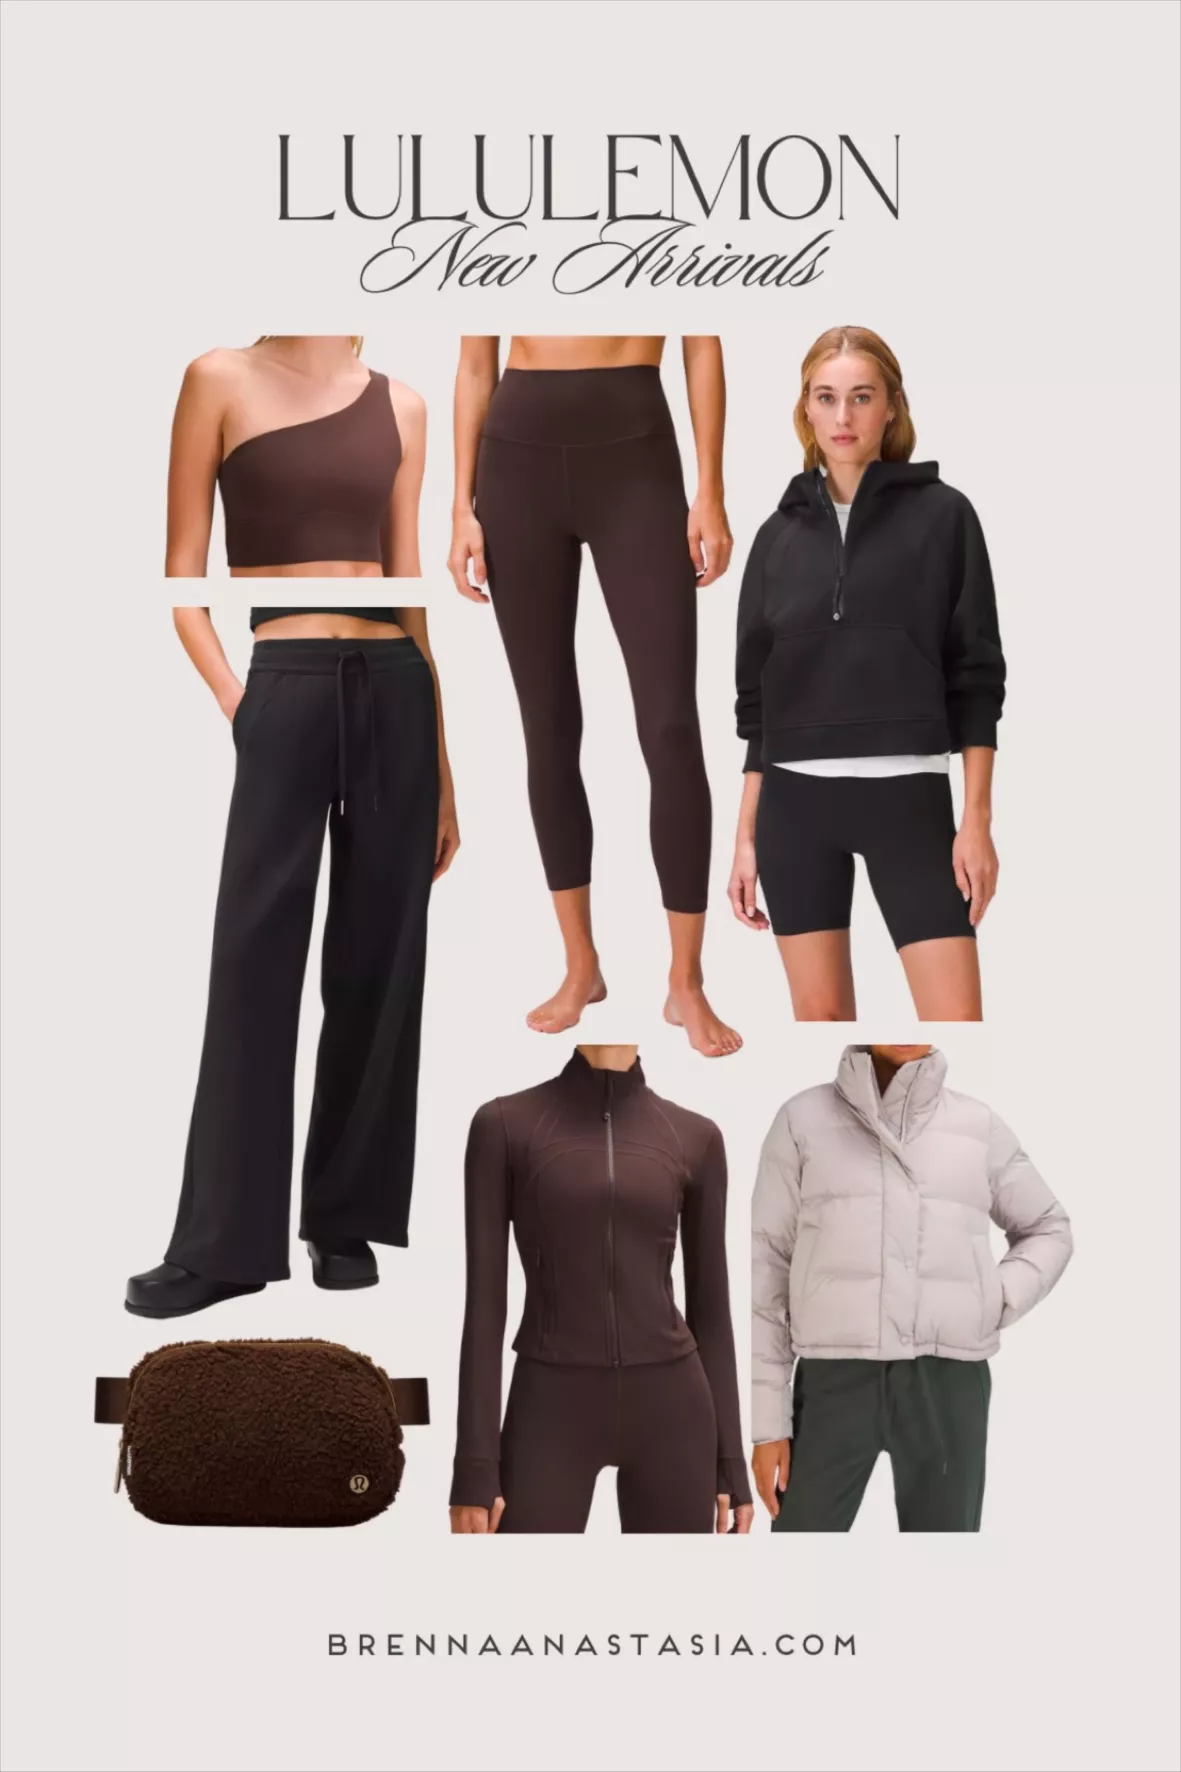 Define Cropped Half Zip curated on LTK